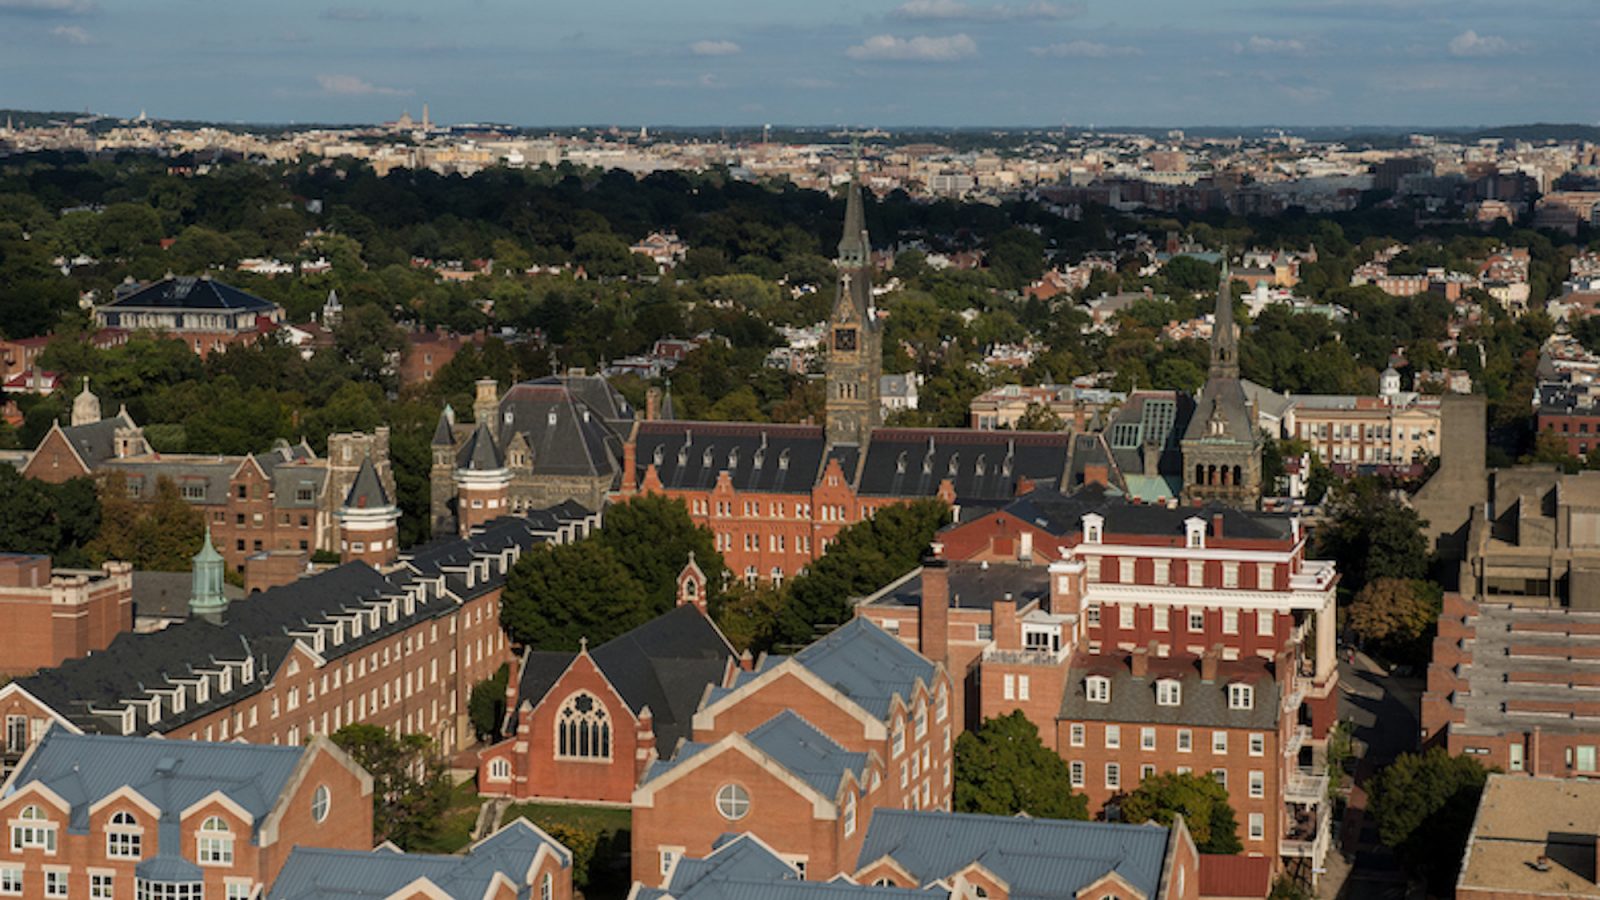 An aerial photograph of Georgetown University including the clock tower of Healy Hall